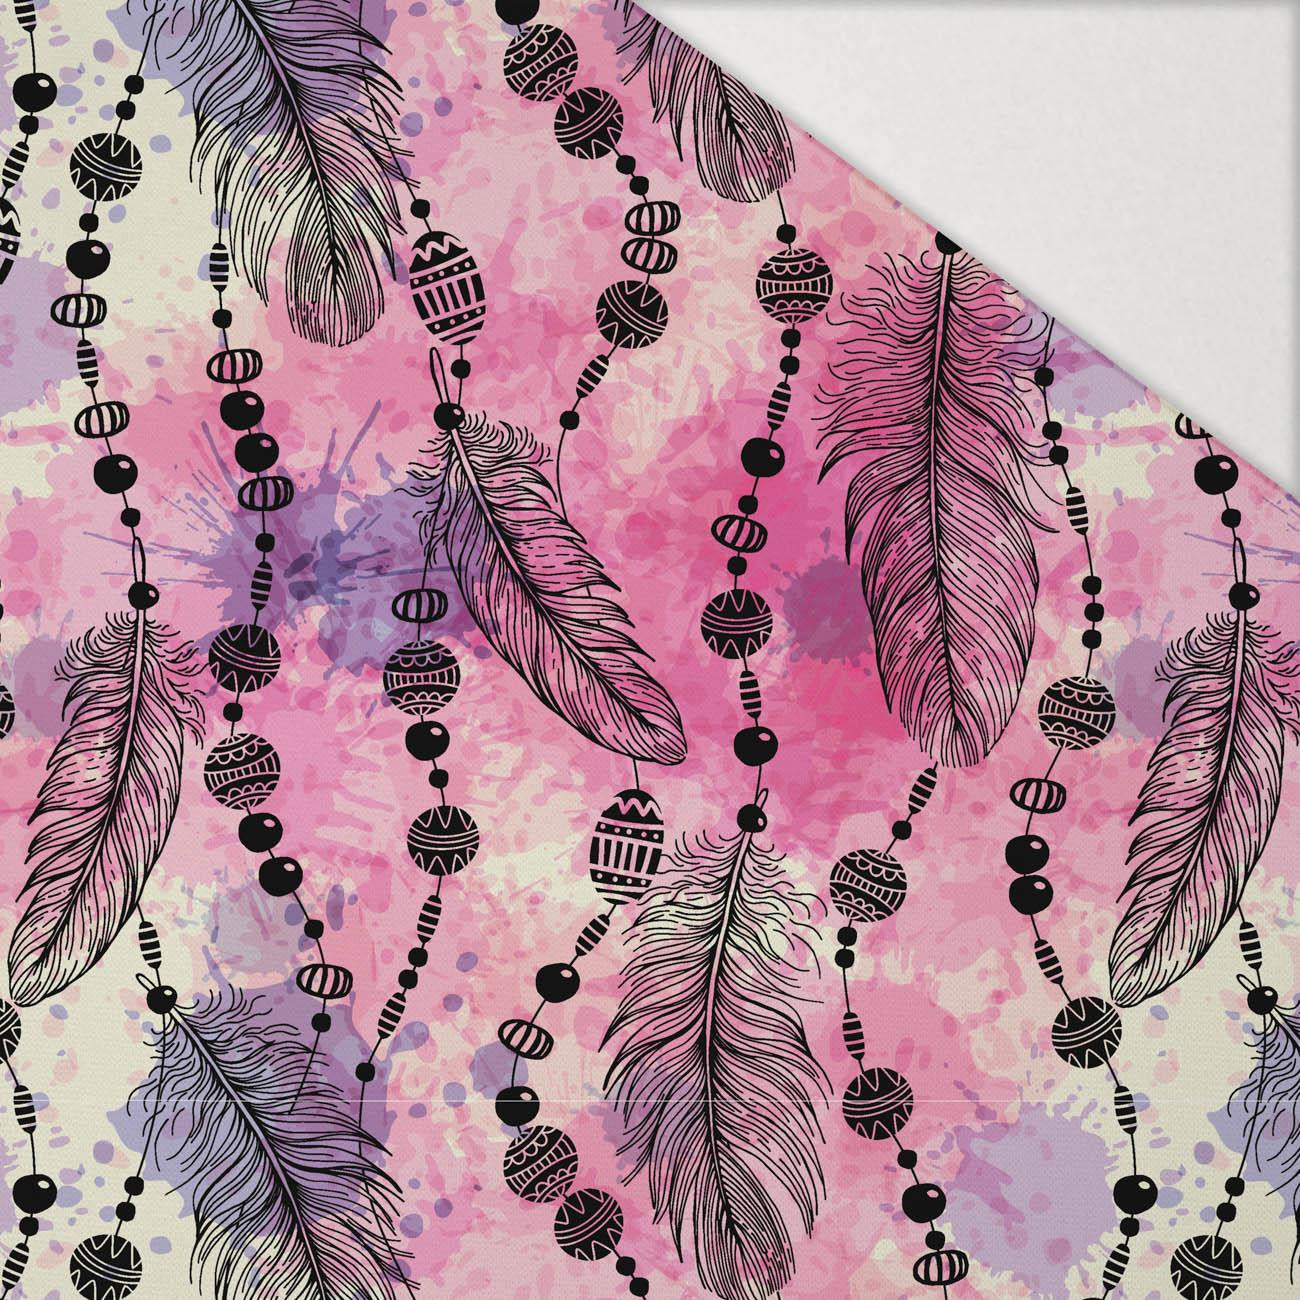 PINK FEATHERS AND BEADS - Hydrophobic brushed knit